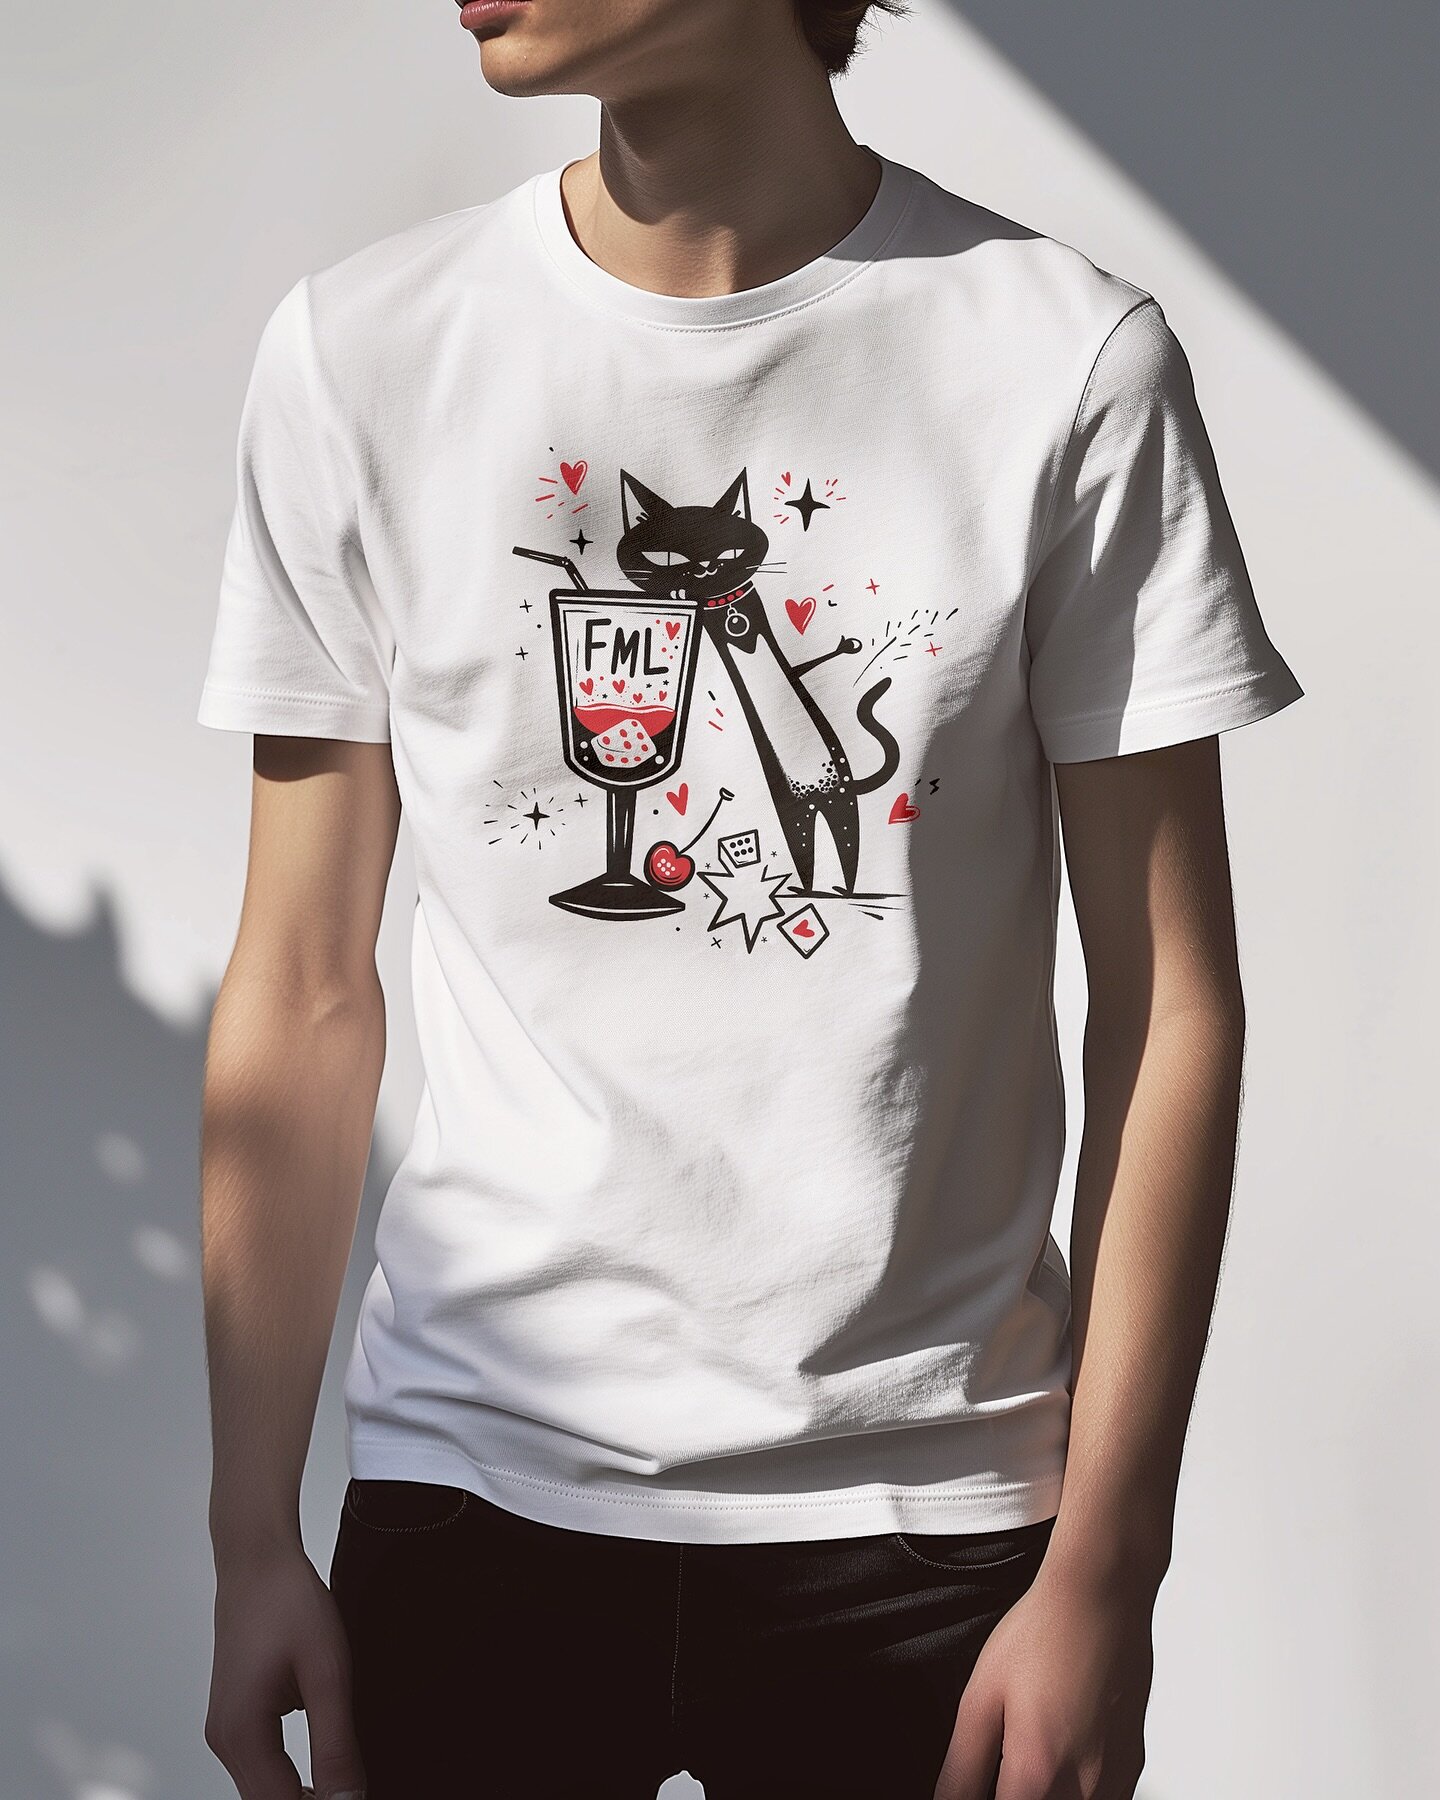 Raise a glass to Lucky&rsquo;s legendary &ldquo;FML&rdquo; moments! Our LIMITED EDITION 1st run tee celebrates Ford Media Lab&rsquo;s feline mascot and his taste for trouble (and expertly crafted cocktails).

This purrfectly comfy tee features a rela